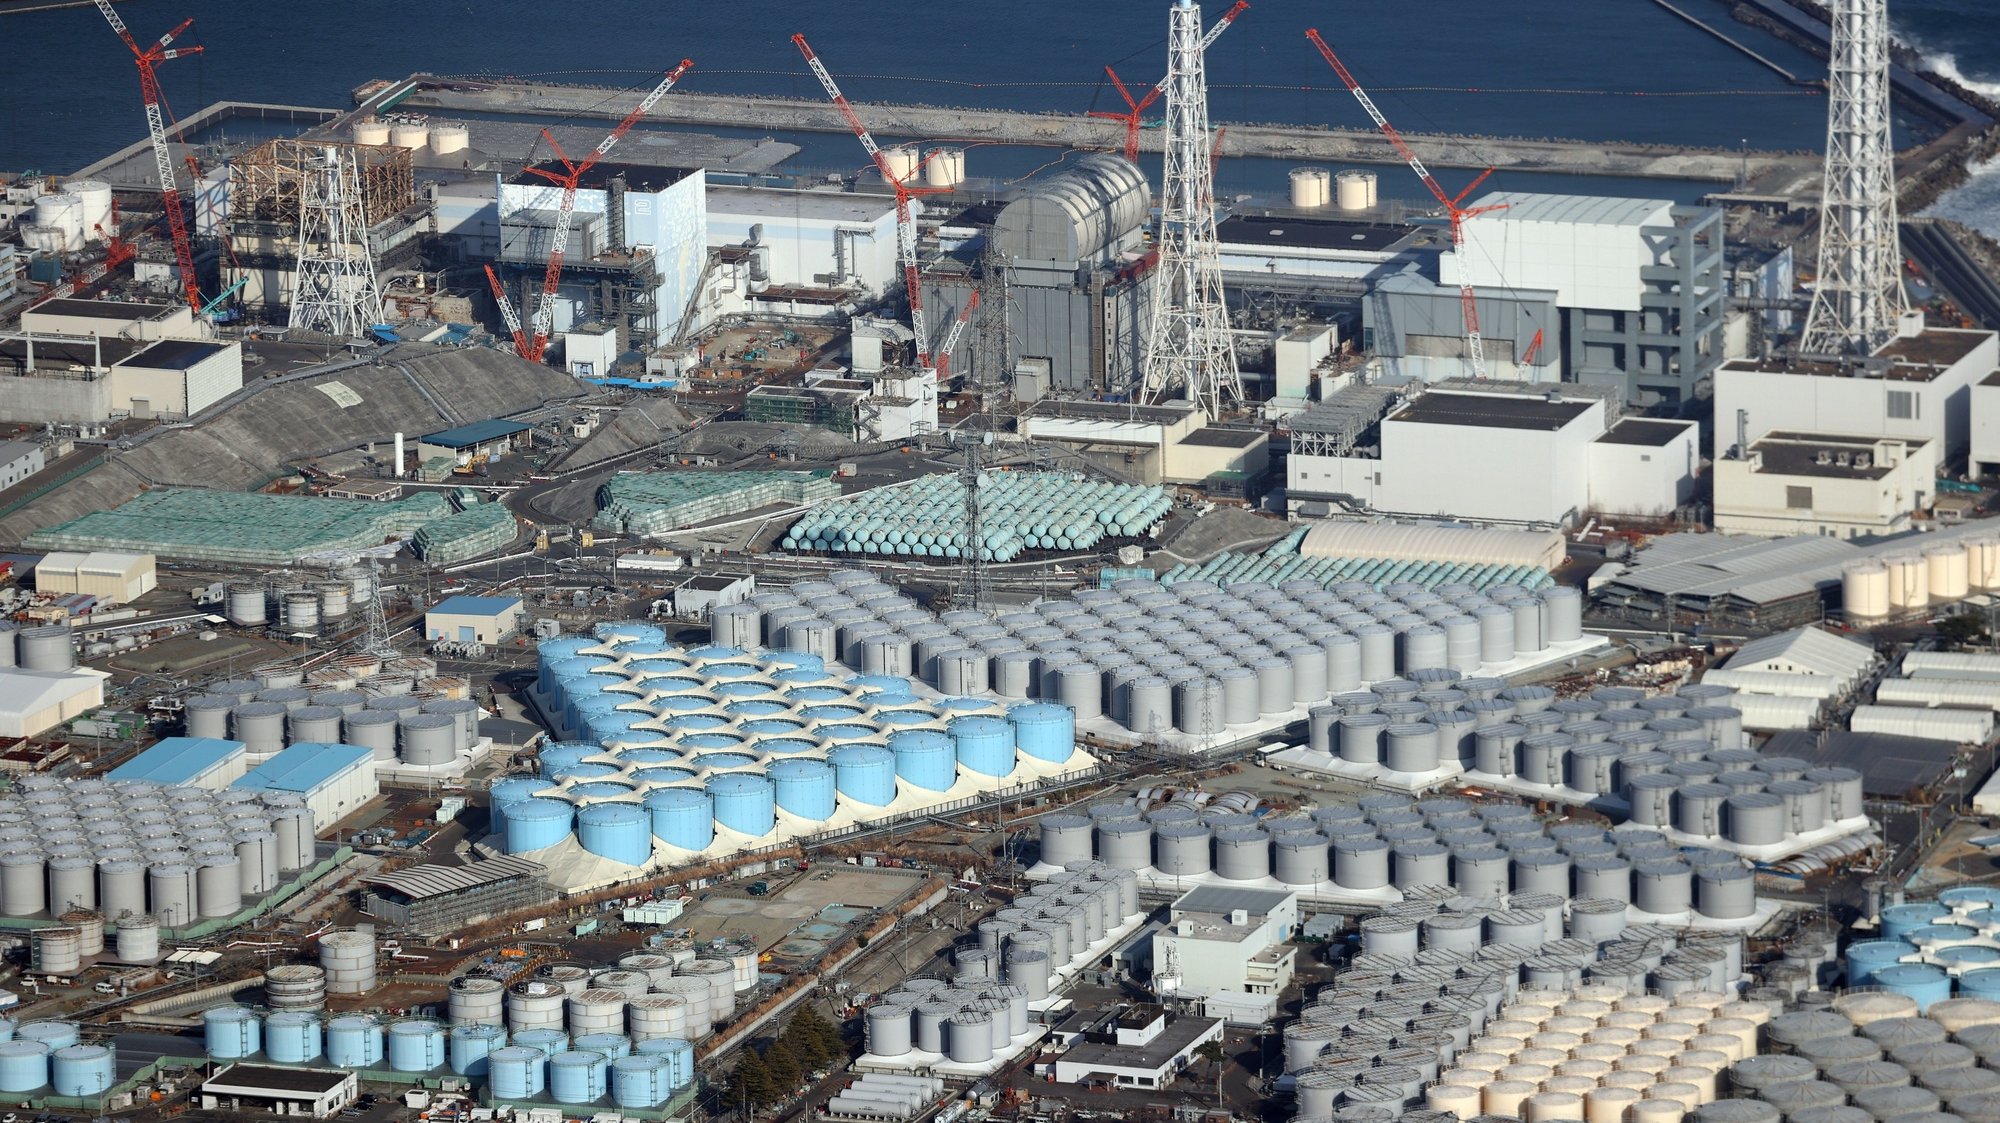 epa09123634 An aerial view shows tanks containing contaminated water at the Fukushima Daiichi nuclear power plant which suffered meltdowns on 11 March 2011, in Fukushima prefecture, northeastern Japan, 14 February 2021 (issued 09 April 2021). The Japanese government is to decide officially the release of treated water containing tritium from the crippled Fukushima Daiichi Nuclear Power Plant to the ocean at a cabinet meeting on 13 April.  EPA/JIJI PRESS JAPAN OUT EDITORIAL USE ONLY/  NO ARCHIVES